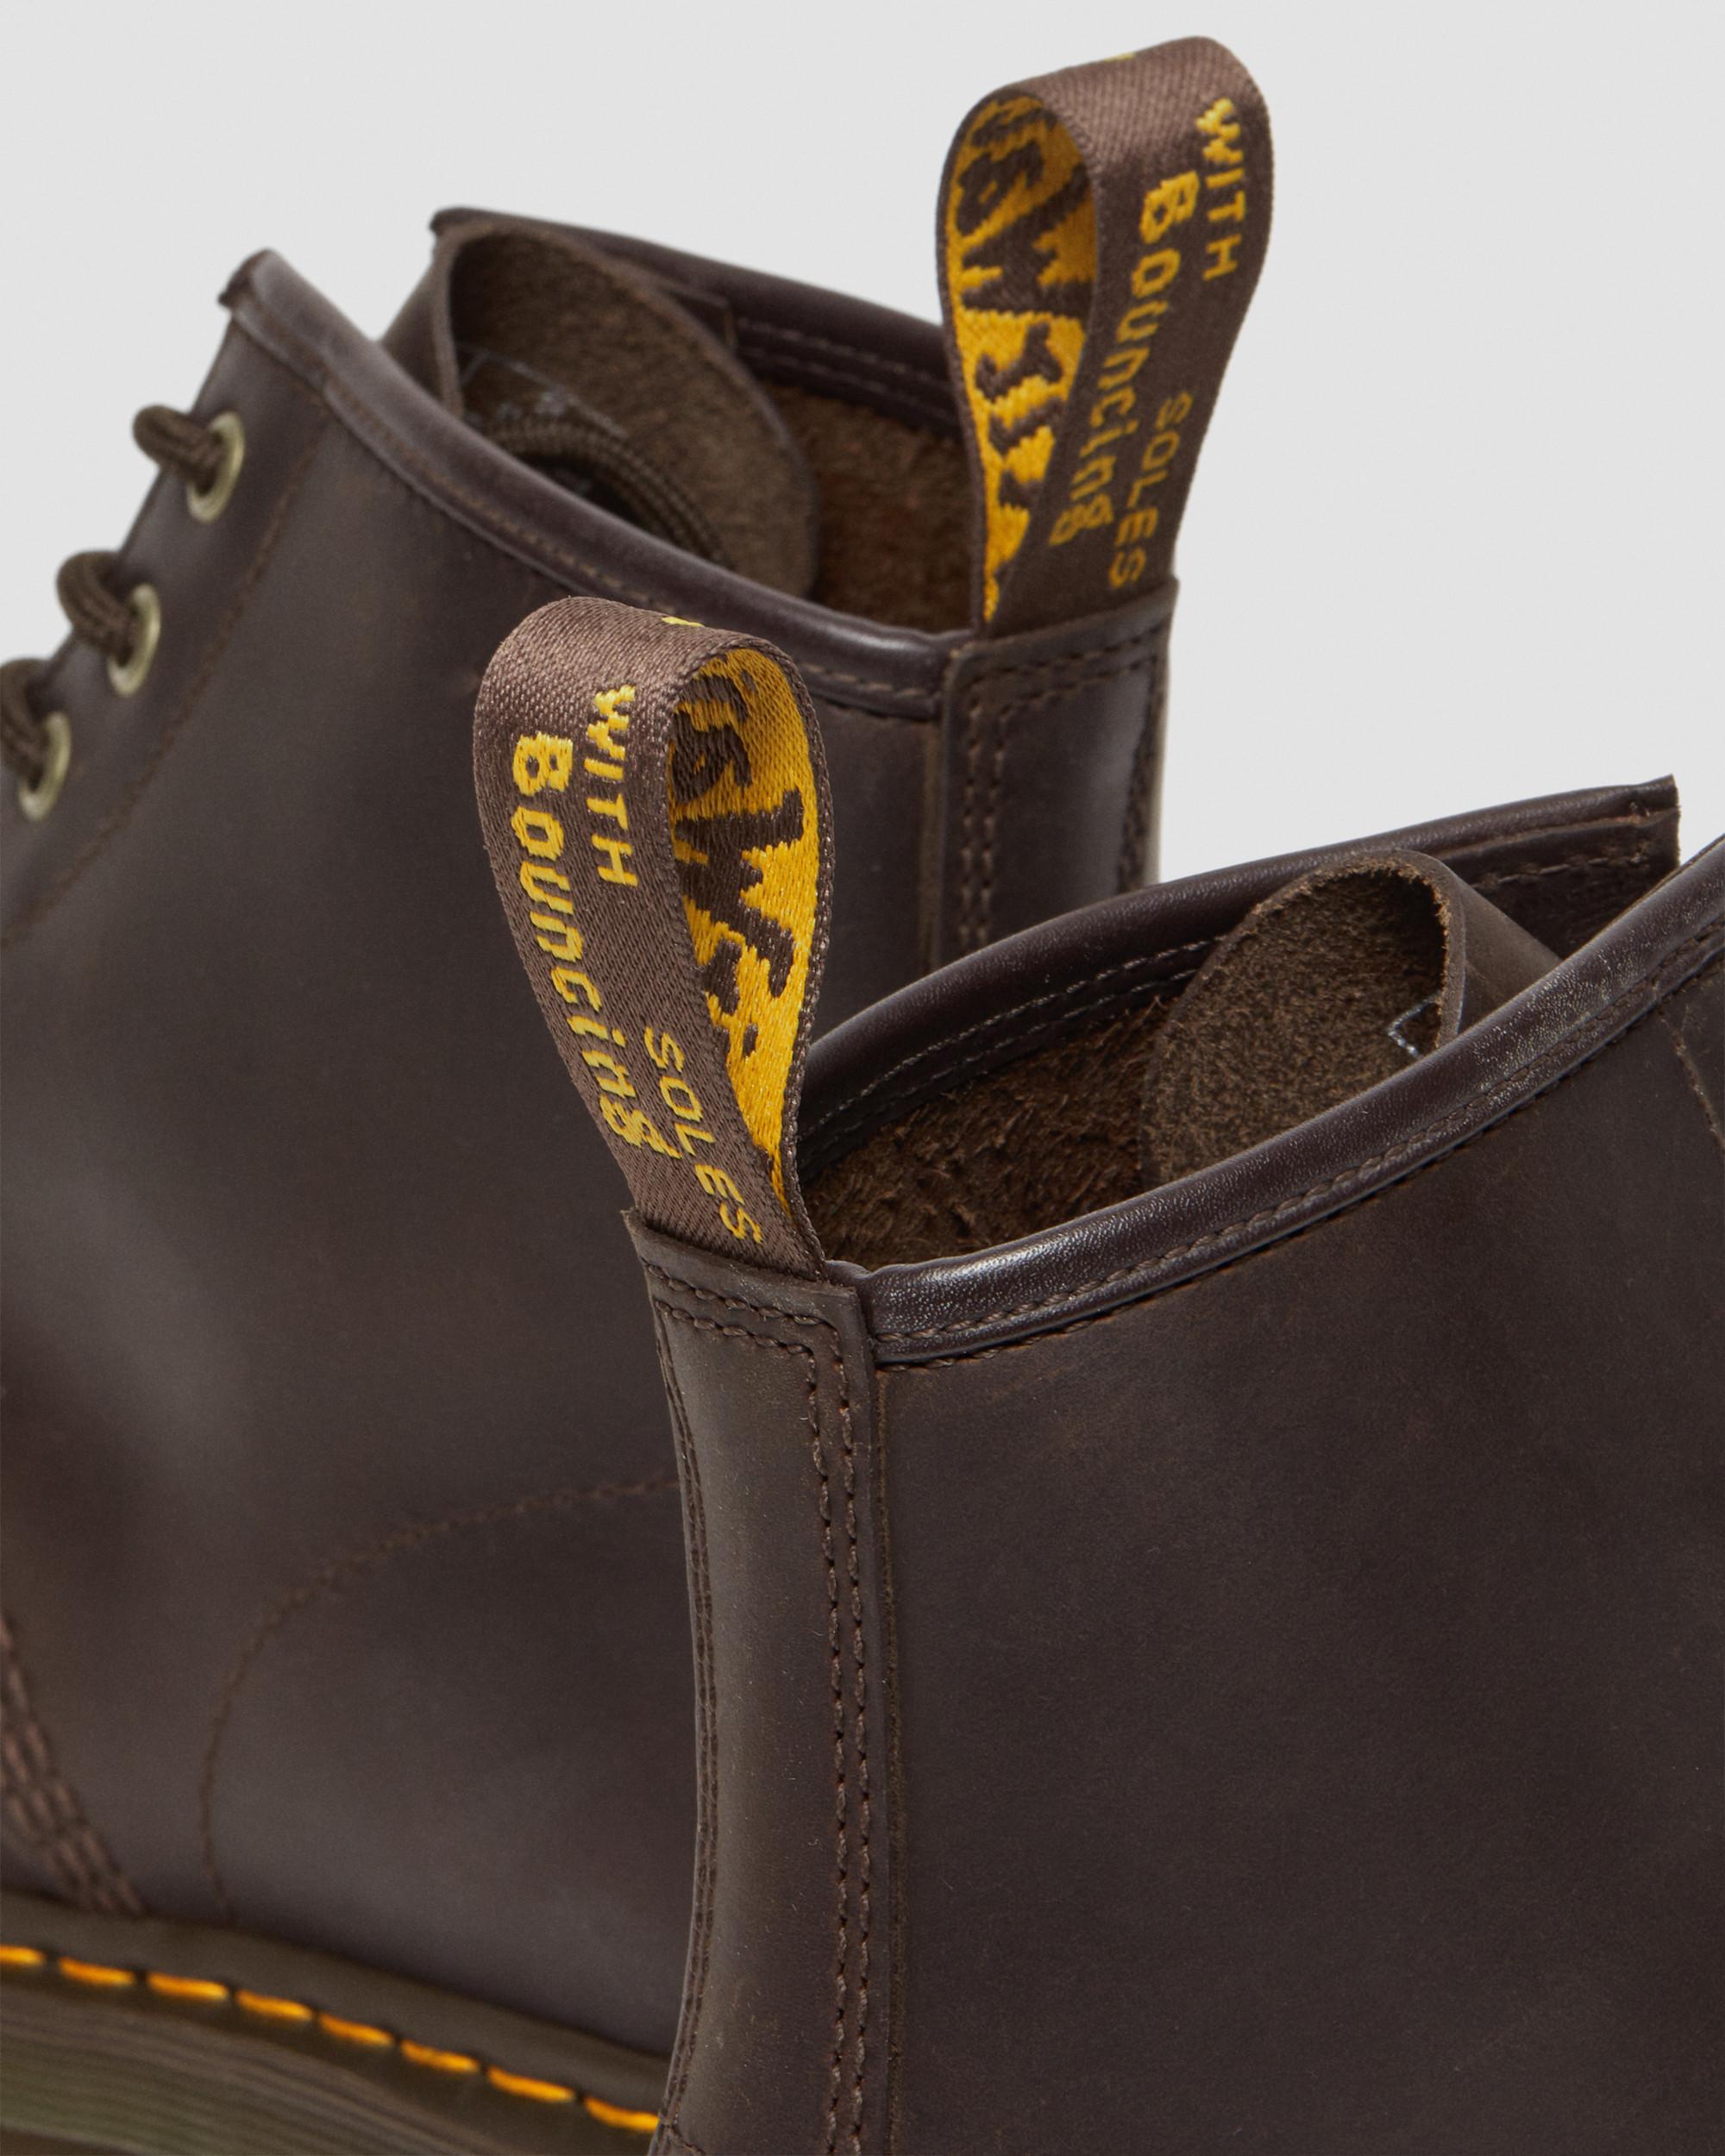 DR MARTENS 101 Crazy Horse Leather Ankle Boots